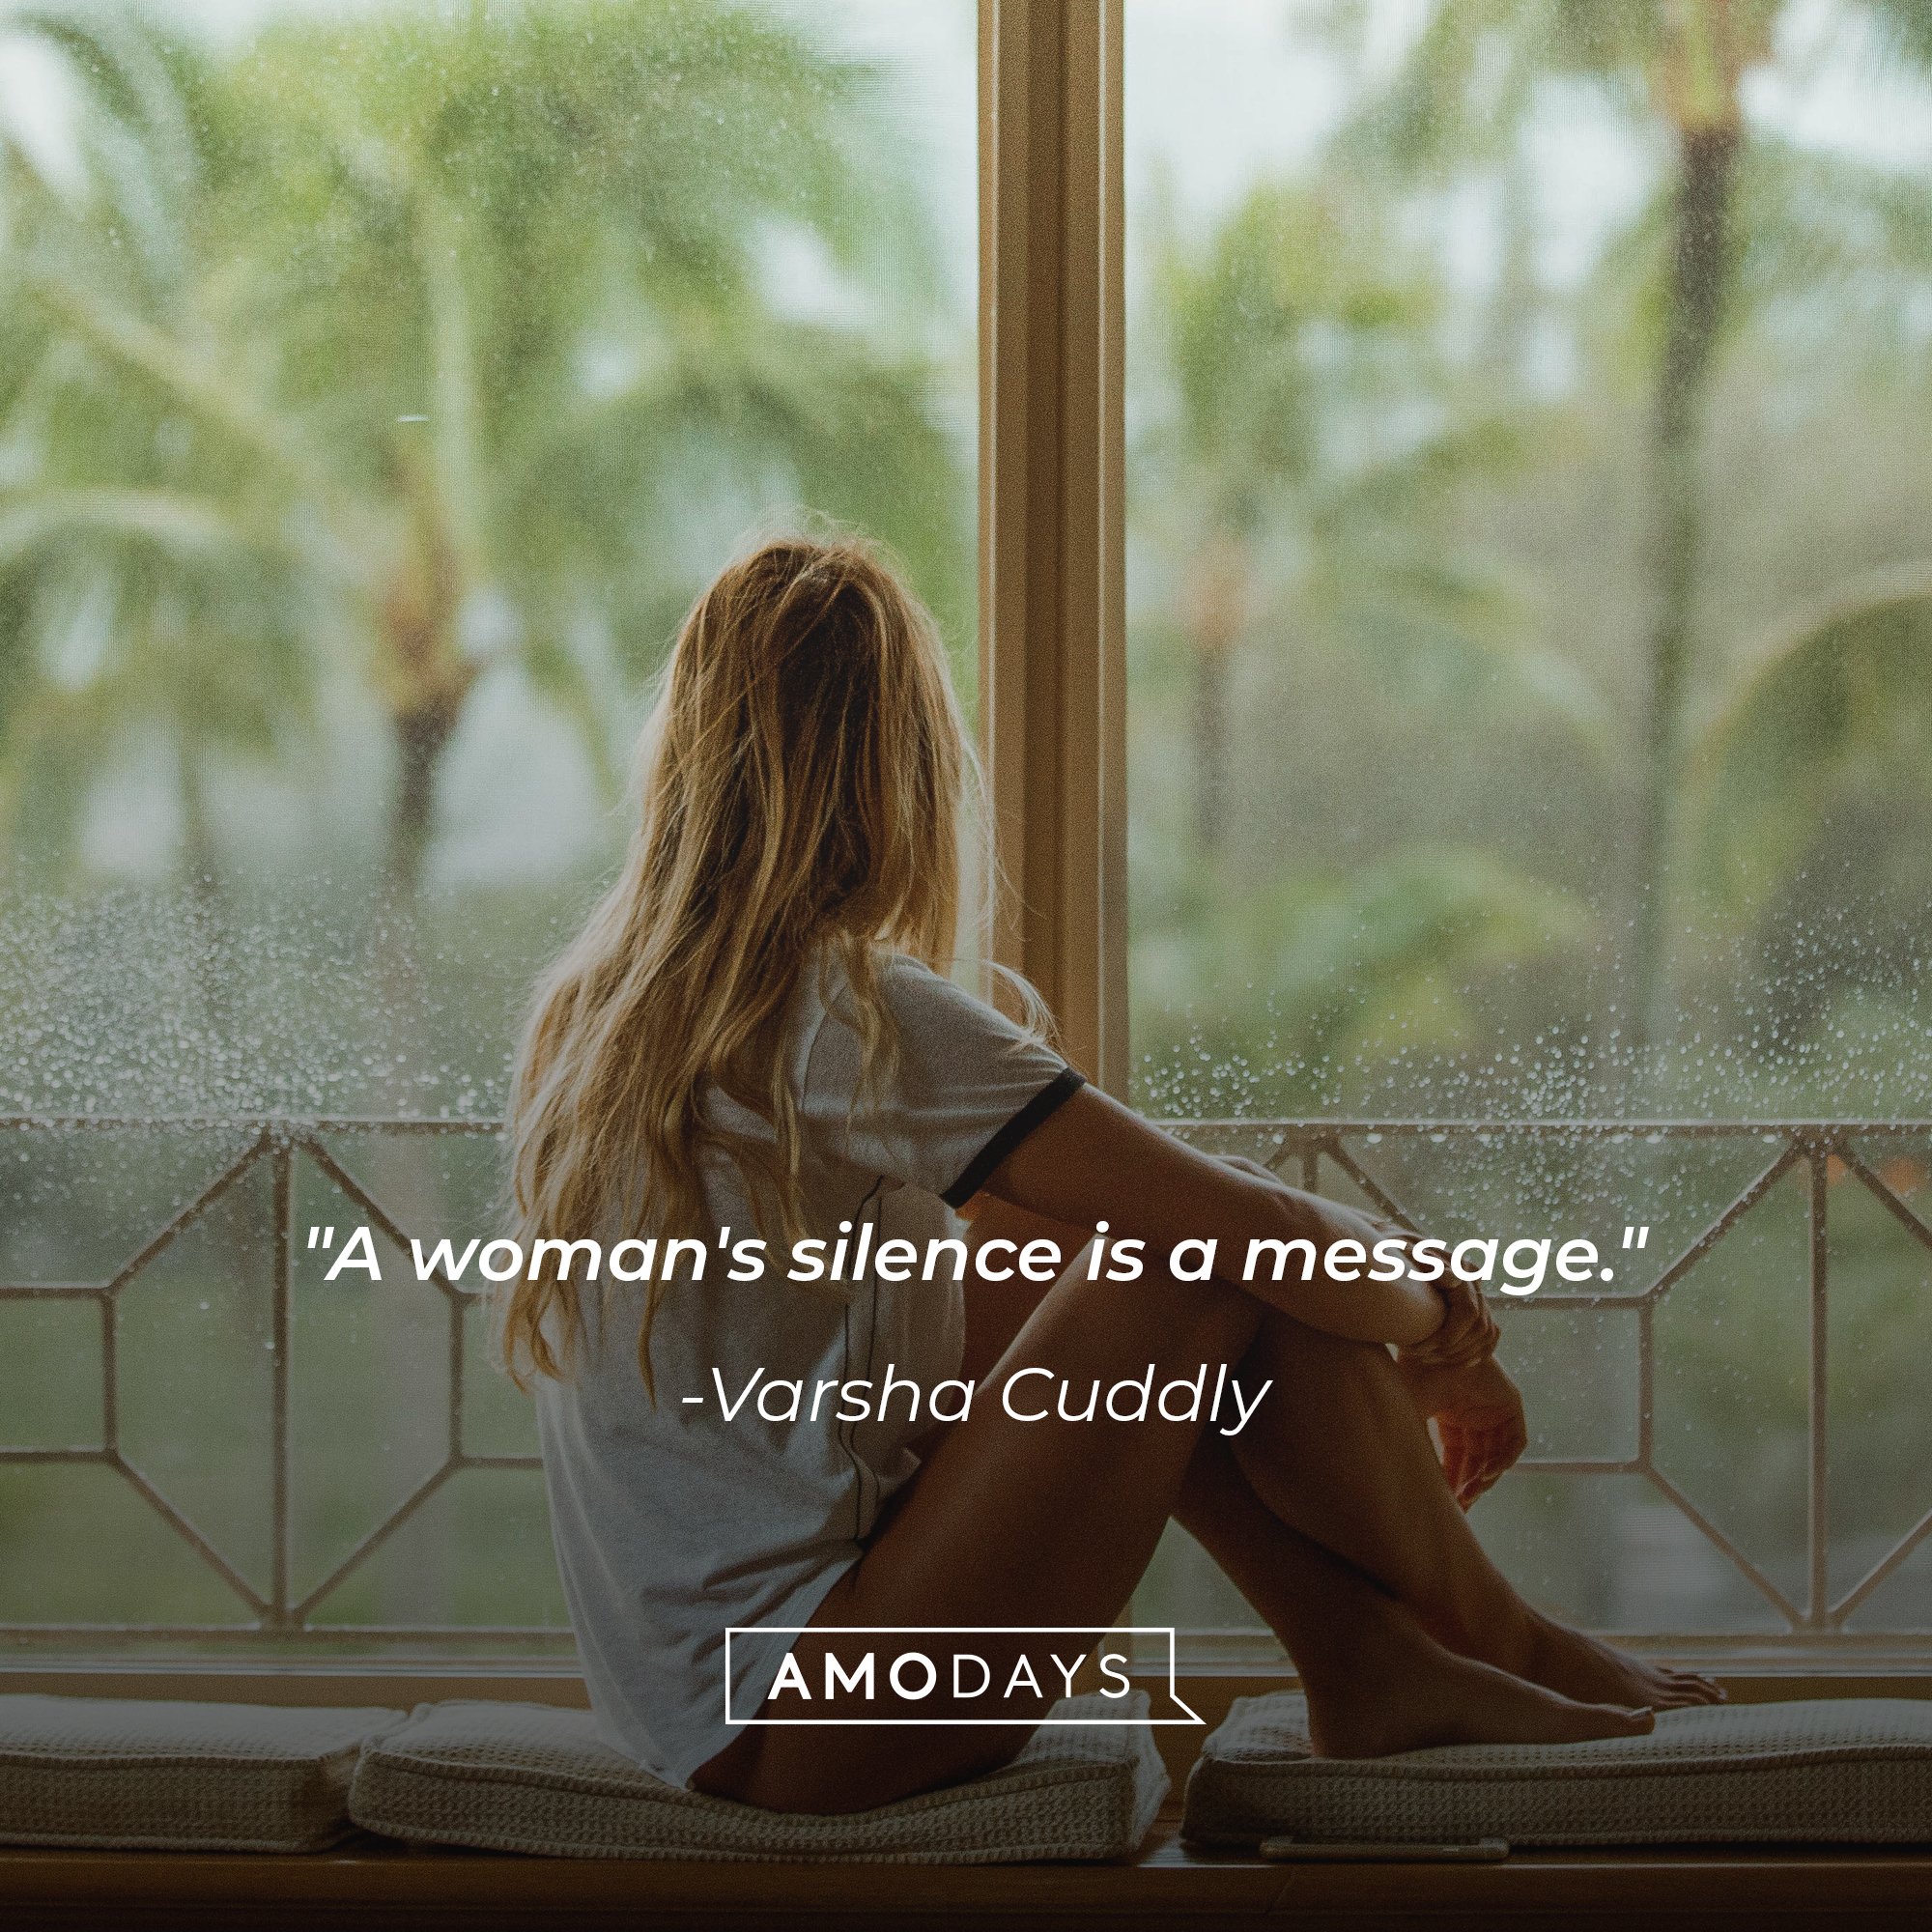 Varsha Cuddly’s quote: "A woman's silence is a message." | Image: AmoDays